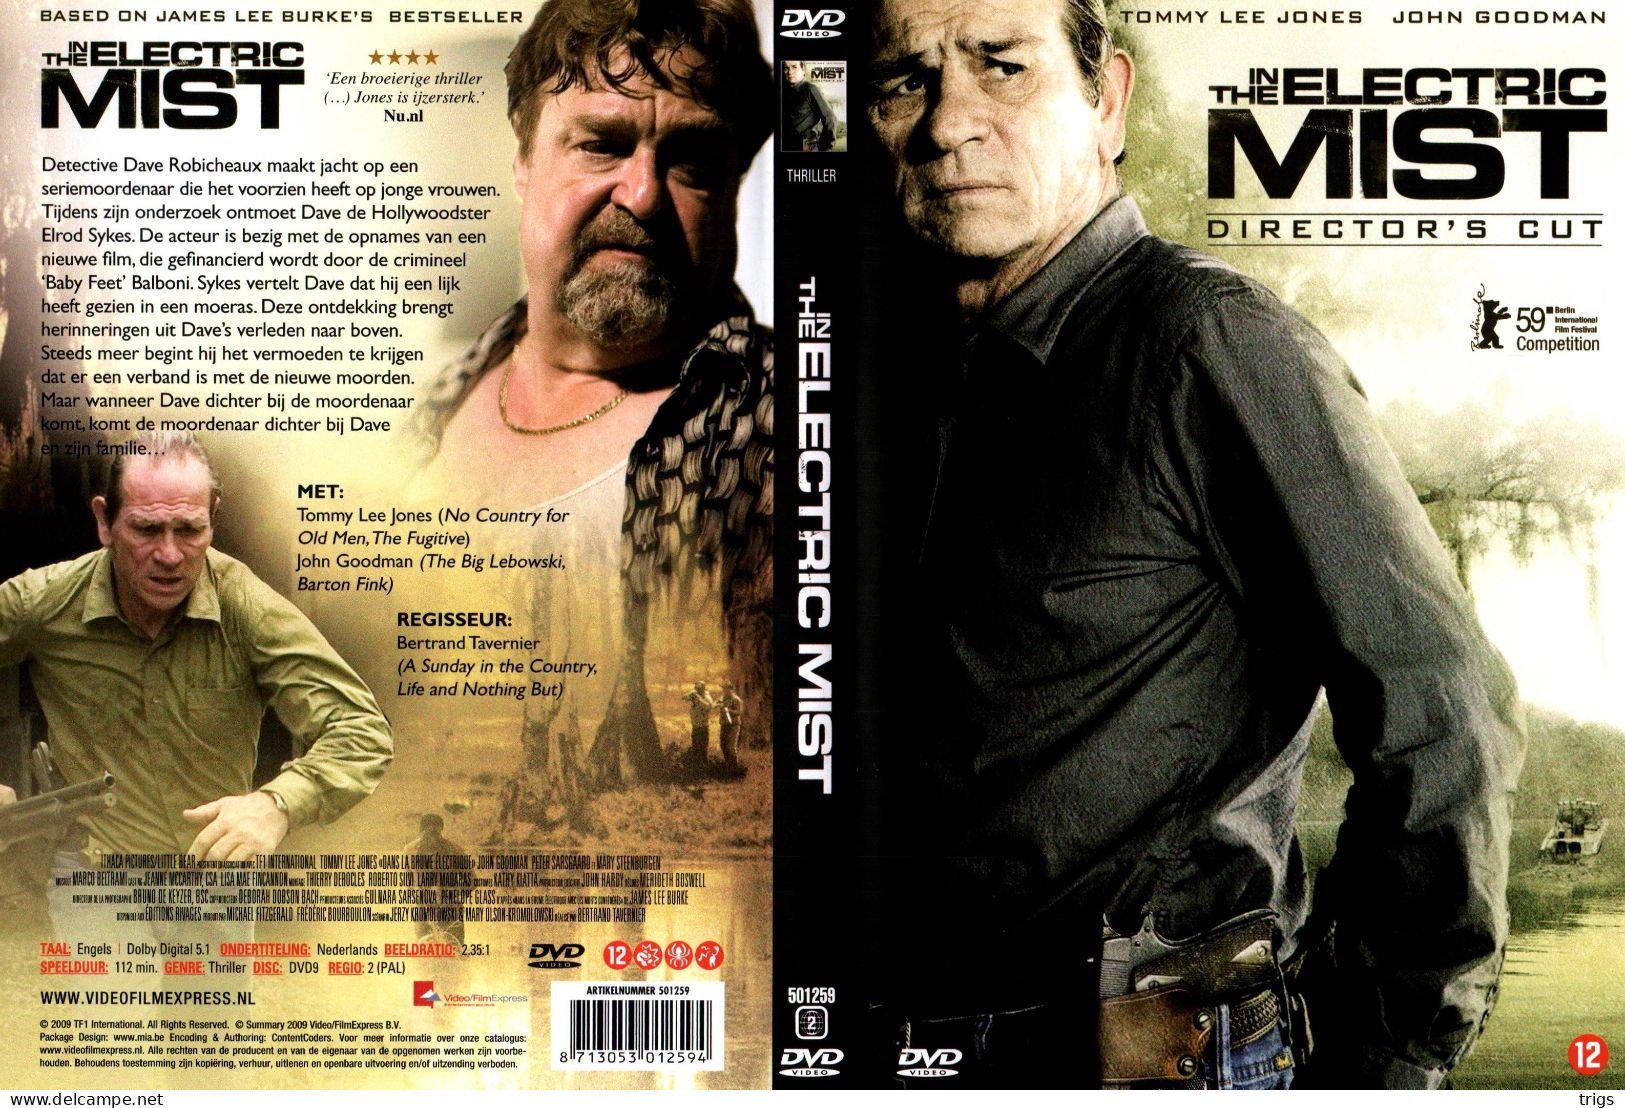 DVD - In The Electric Mist - Crime